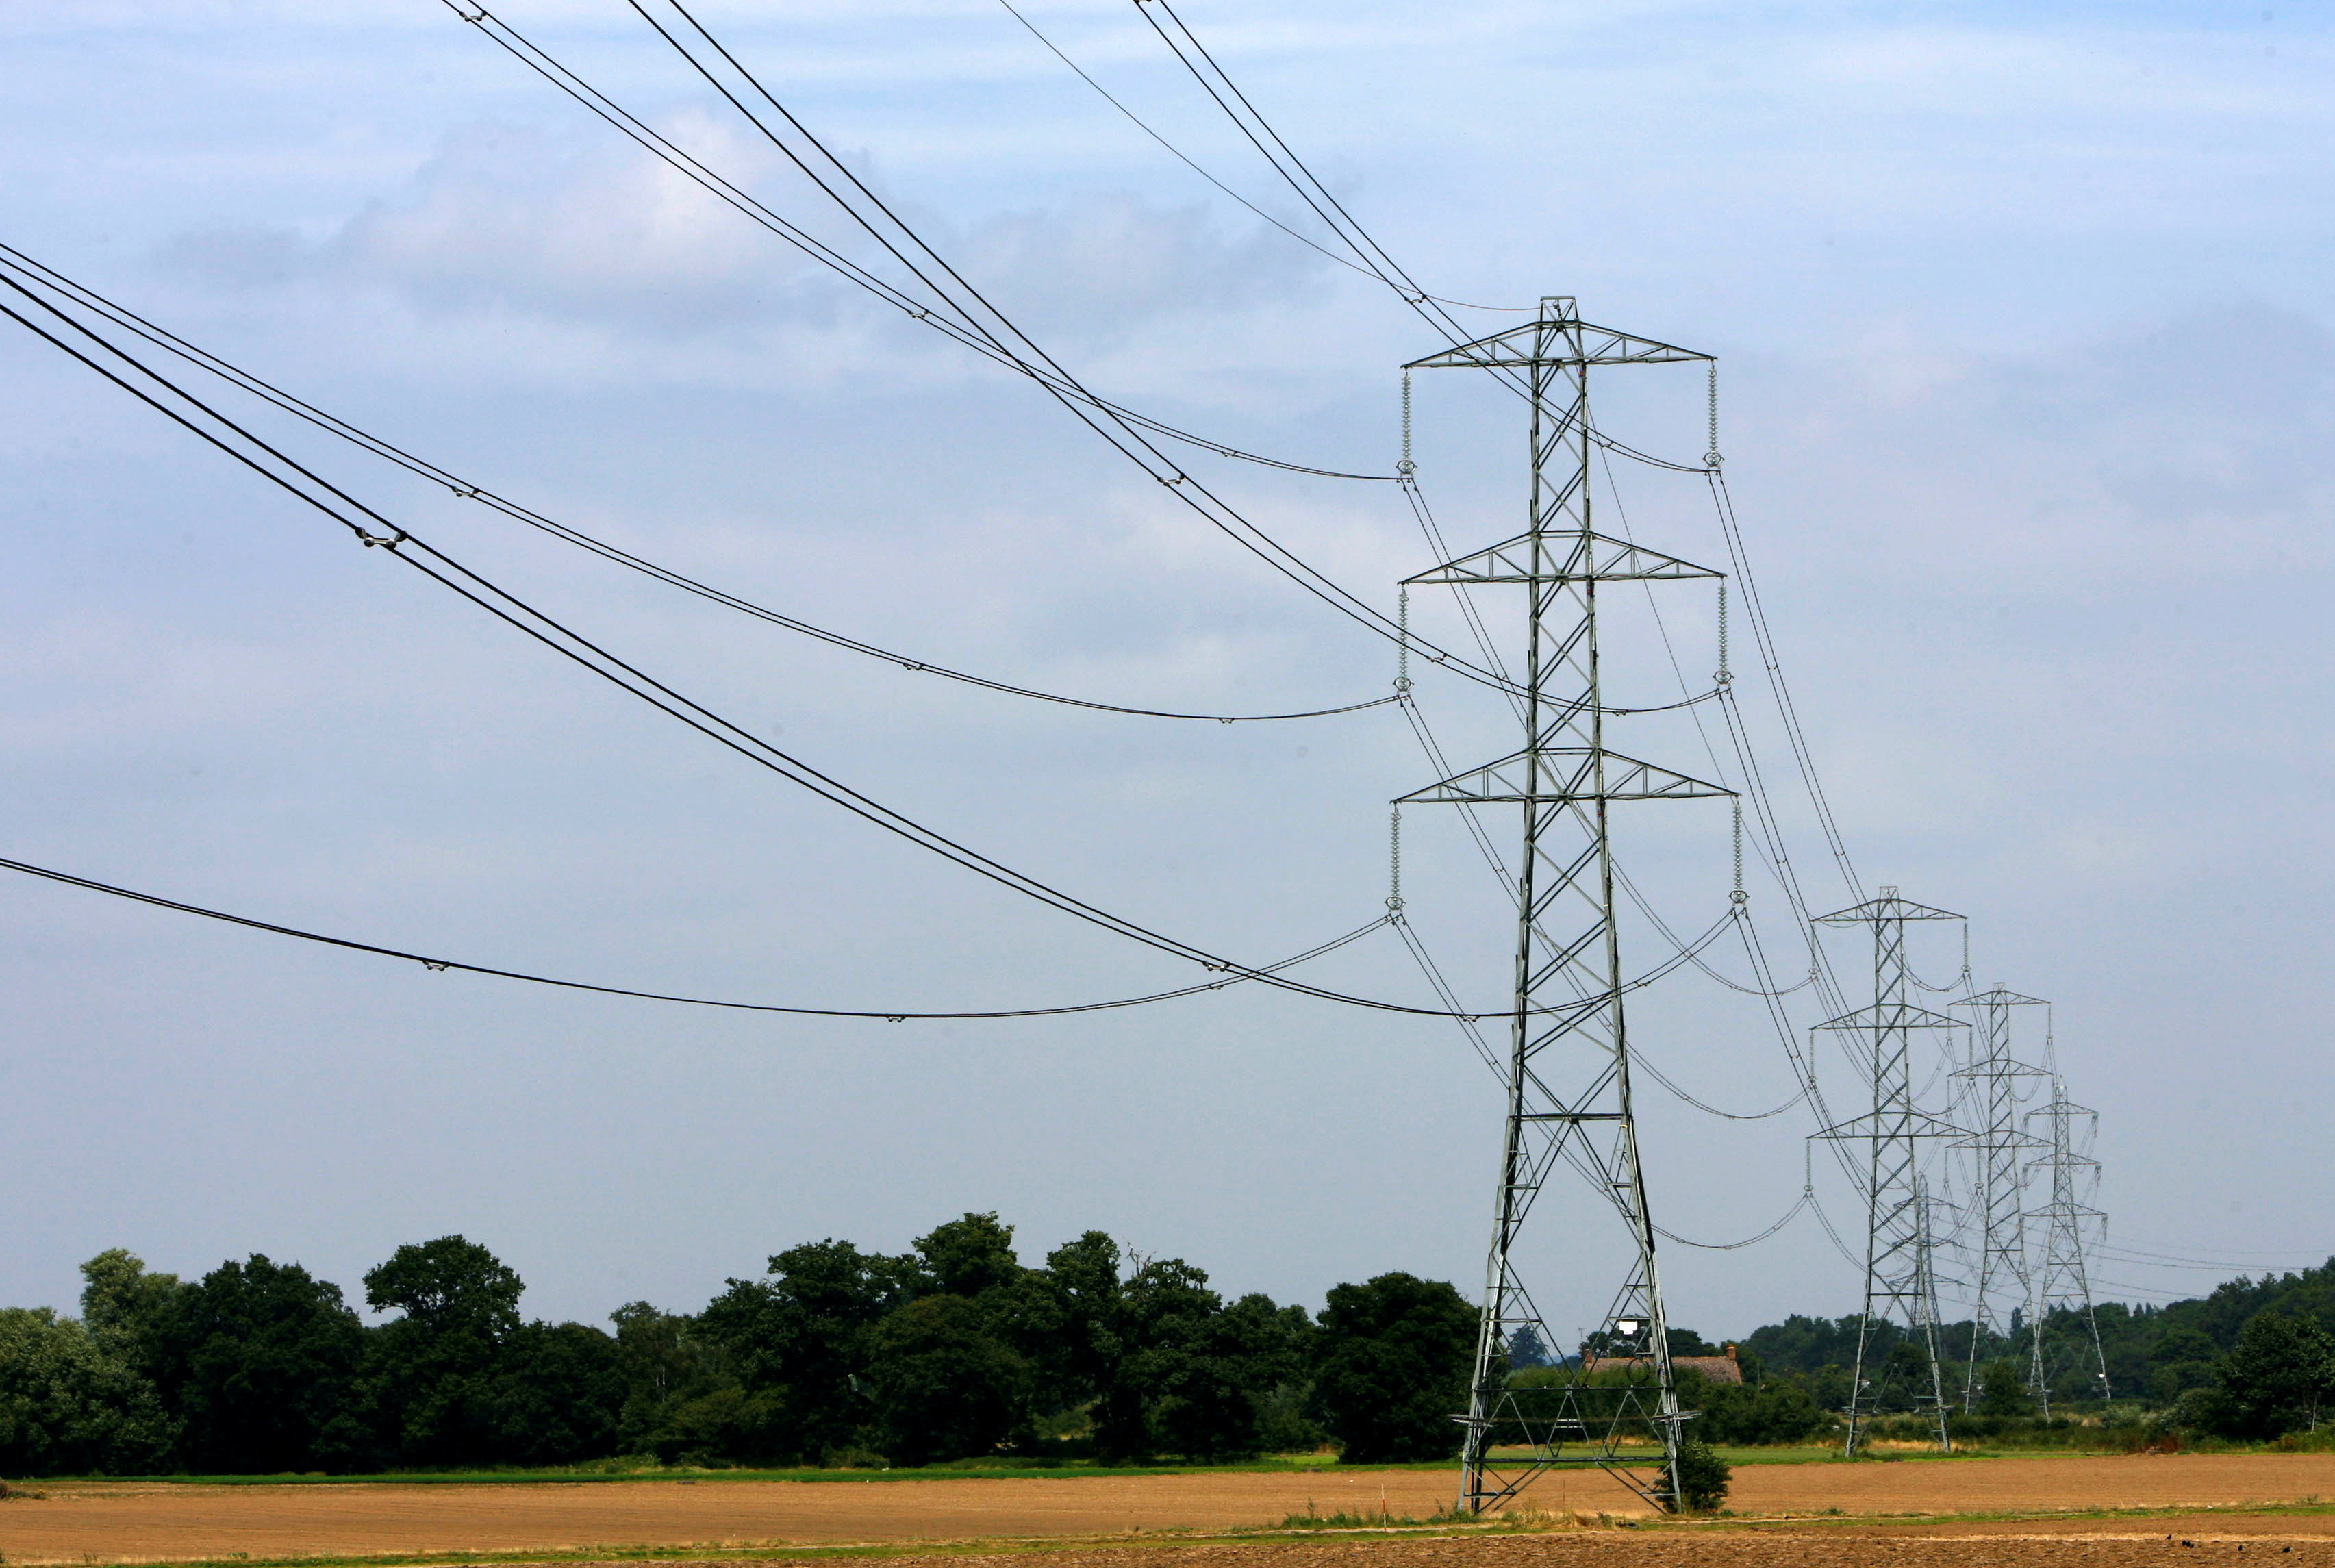 Electricity pylons are pictured near Cobham in Surrey, southern England, July 25, 2008. REUTERS/Luke MacGregor